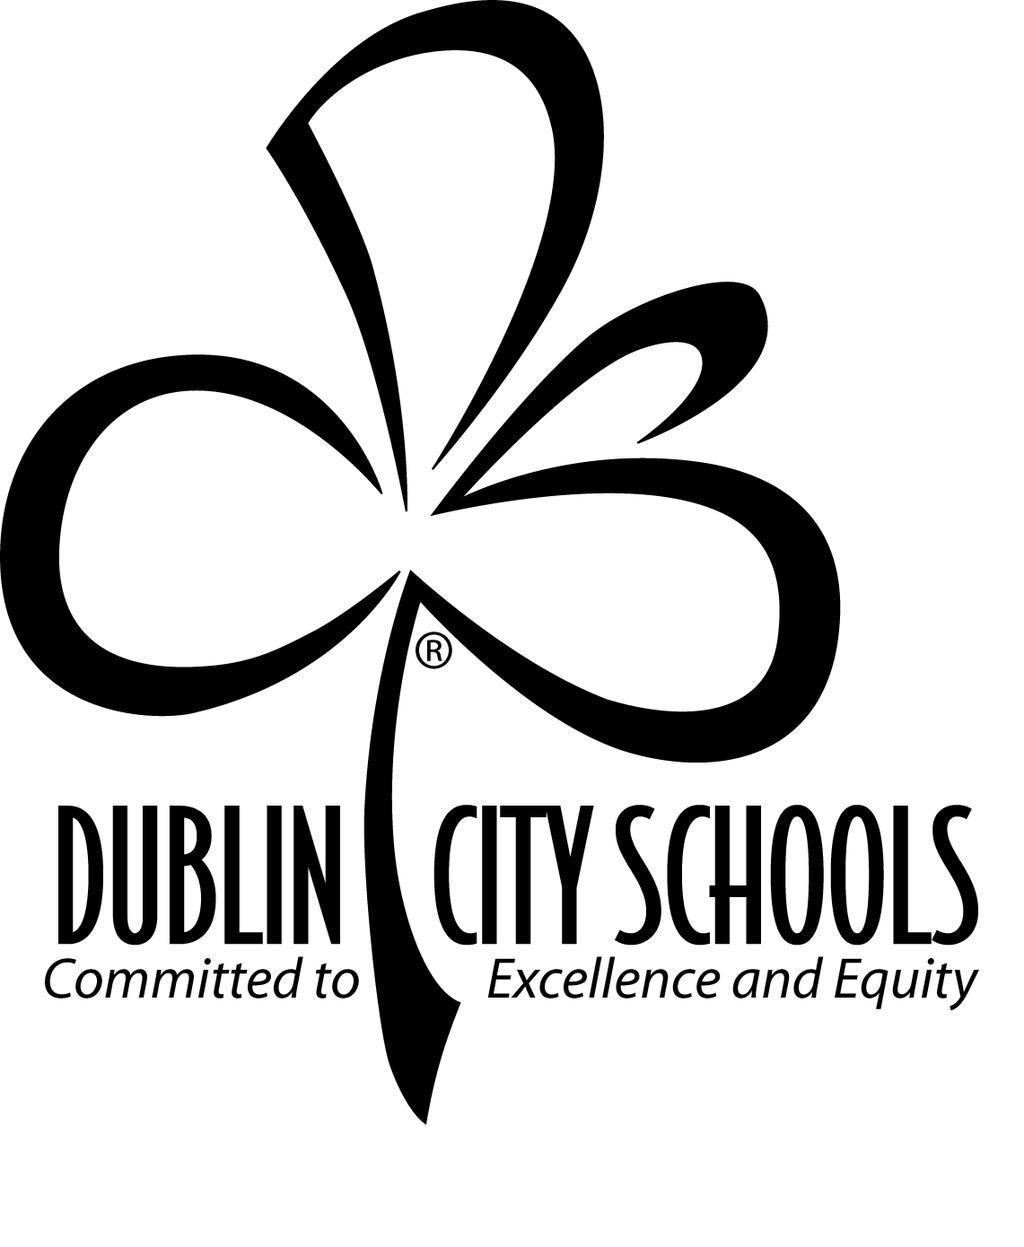 Philosophy The Dublin City Schools Mathematics Program is designed to set clear and consistent expectations in order to help support children with the development of mathematical understanding.